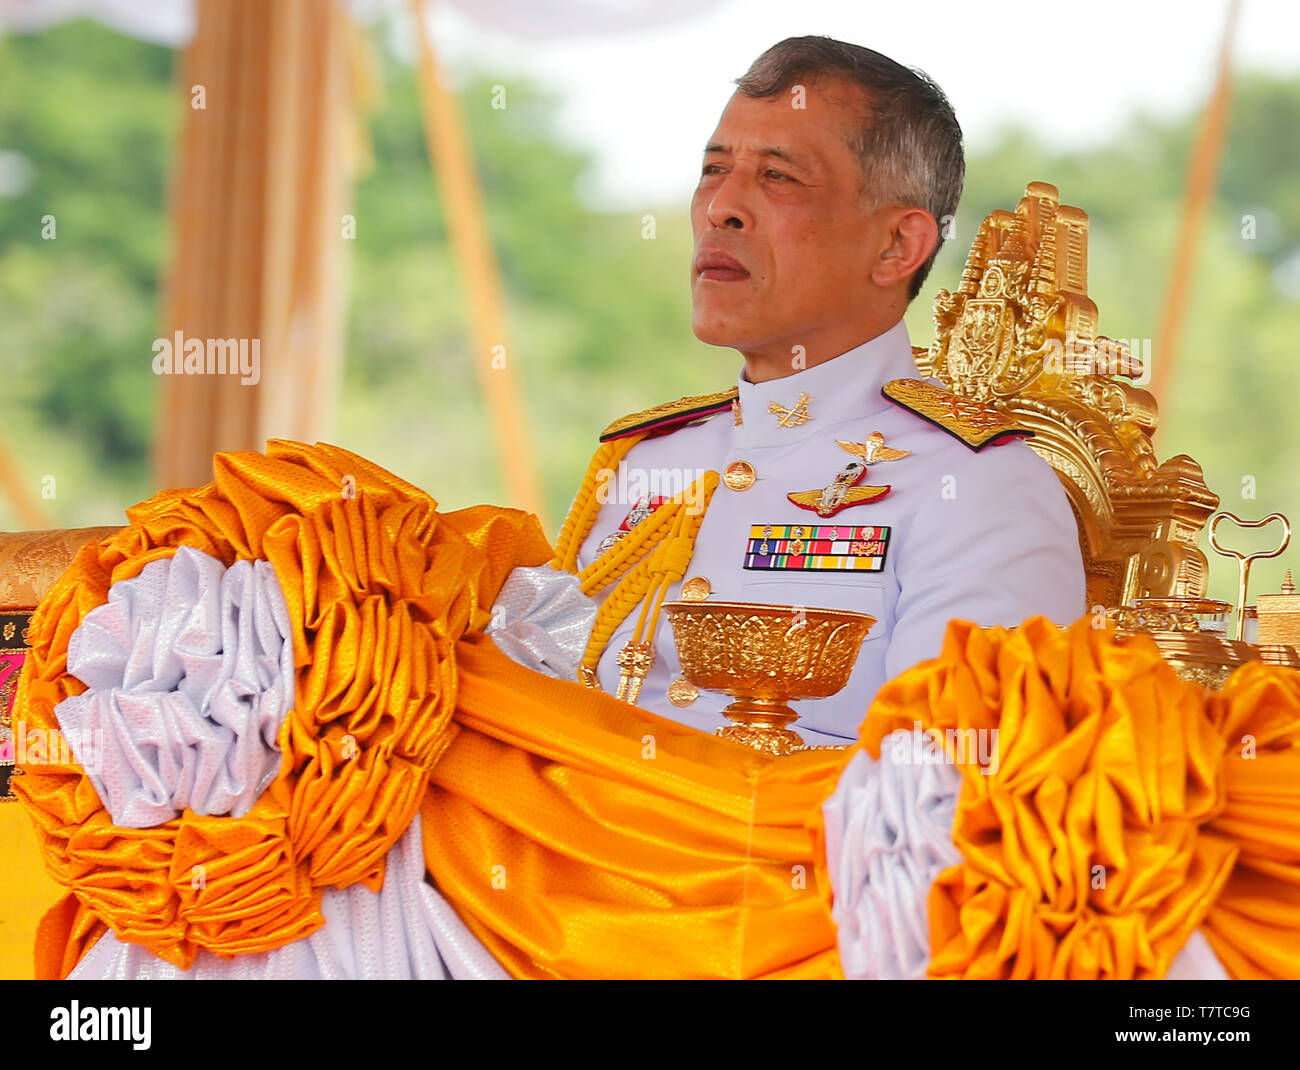 Thailand's King Maha Vajiralongkorn Bodindradebayavarangkun (Rama X)  watches the annual Royal Ploughing Ceremony in Sanam Luang. The annual  royal ploughing ceremony is an ancient rite which officially marks the  beginning of the